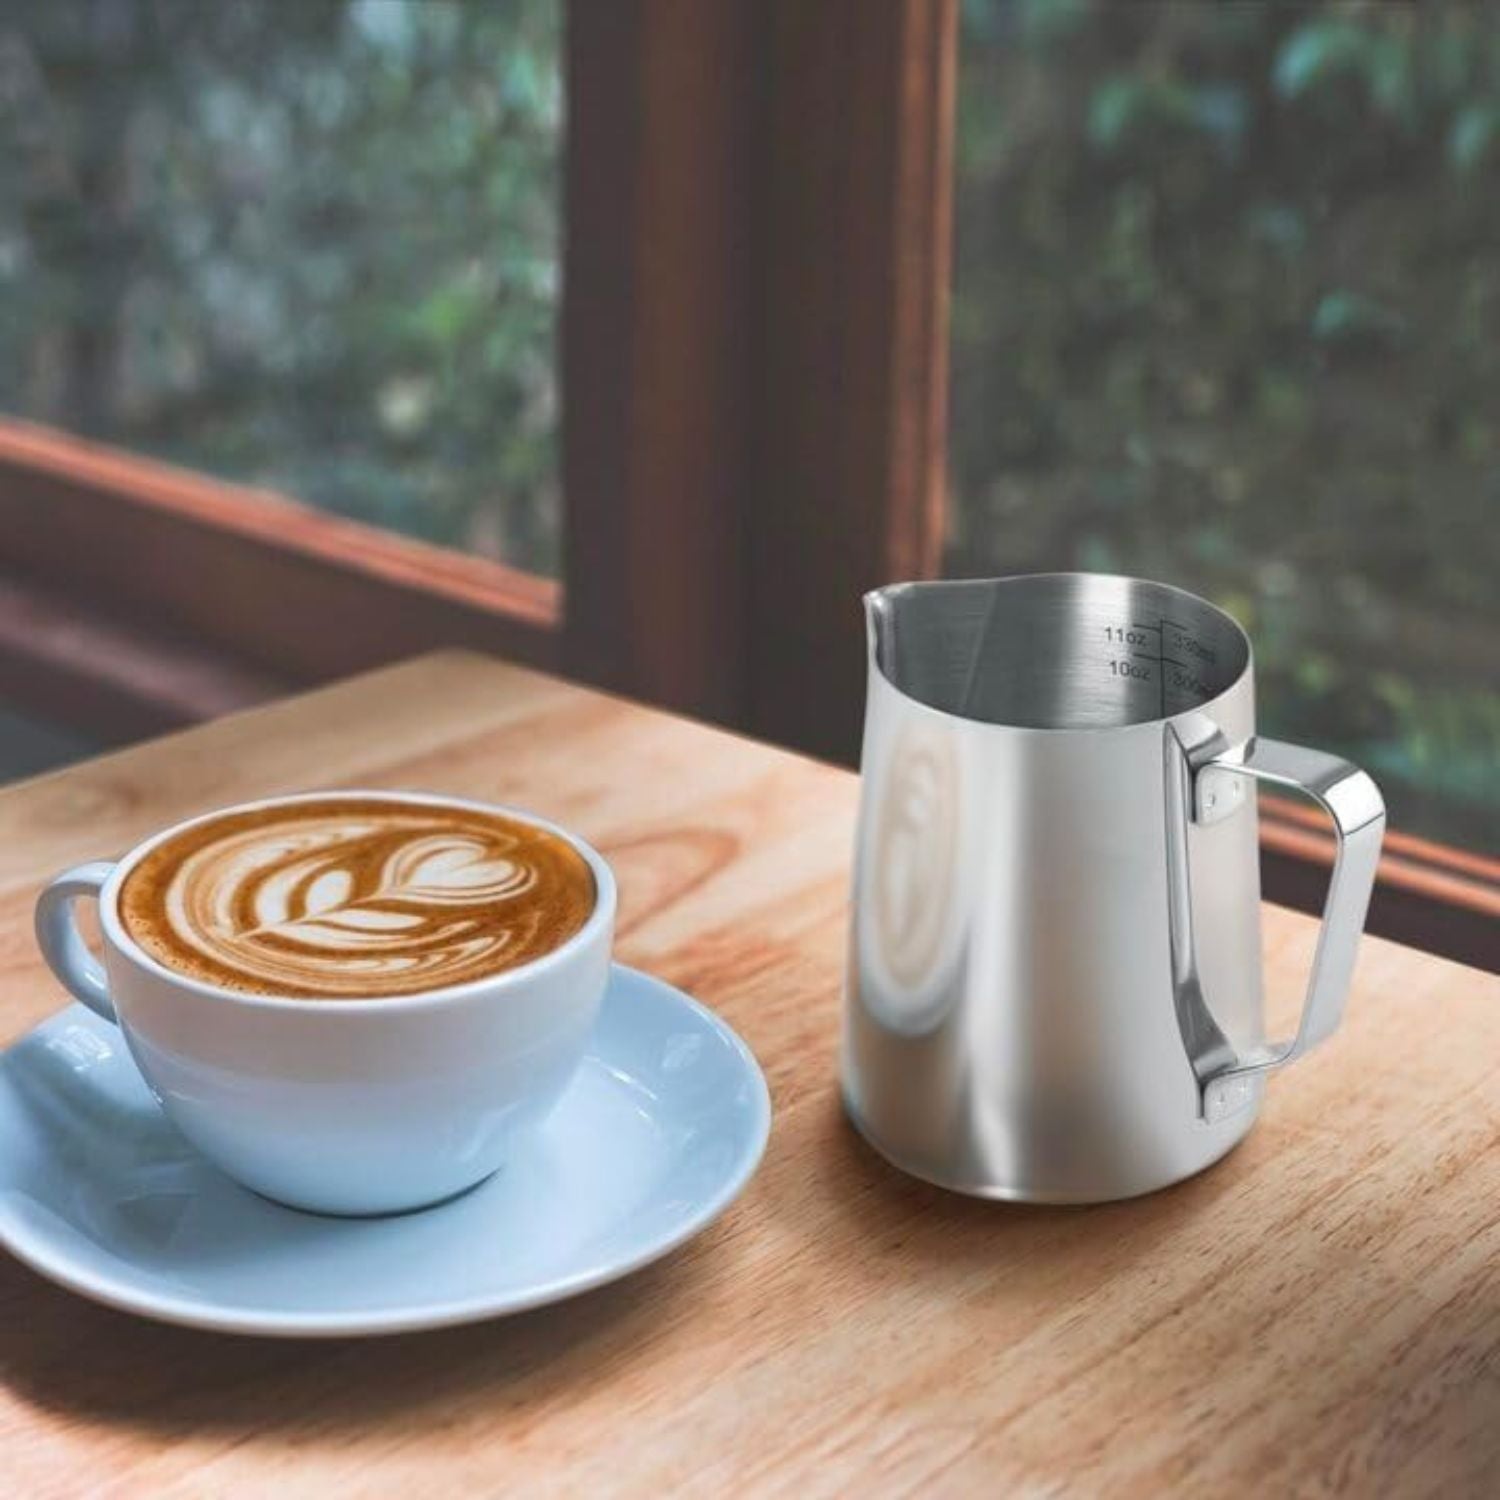 Logo Customize Milk Frother Latte Art Cup Milk Frothing Pitcher